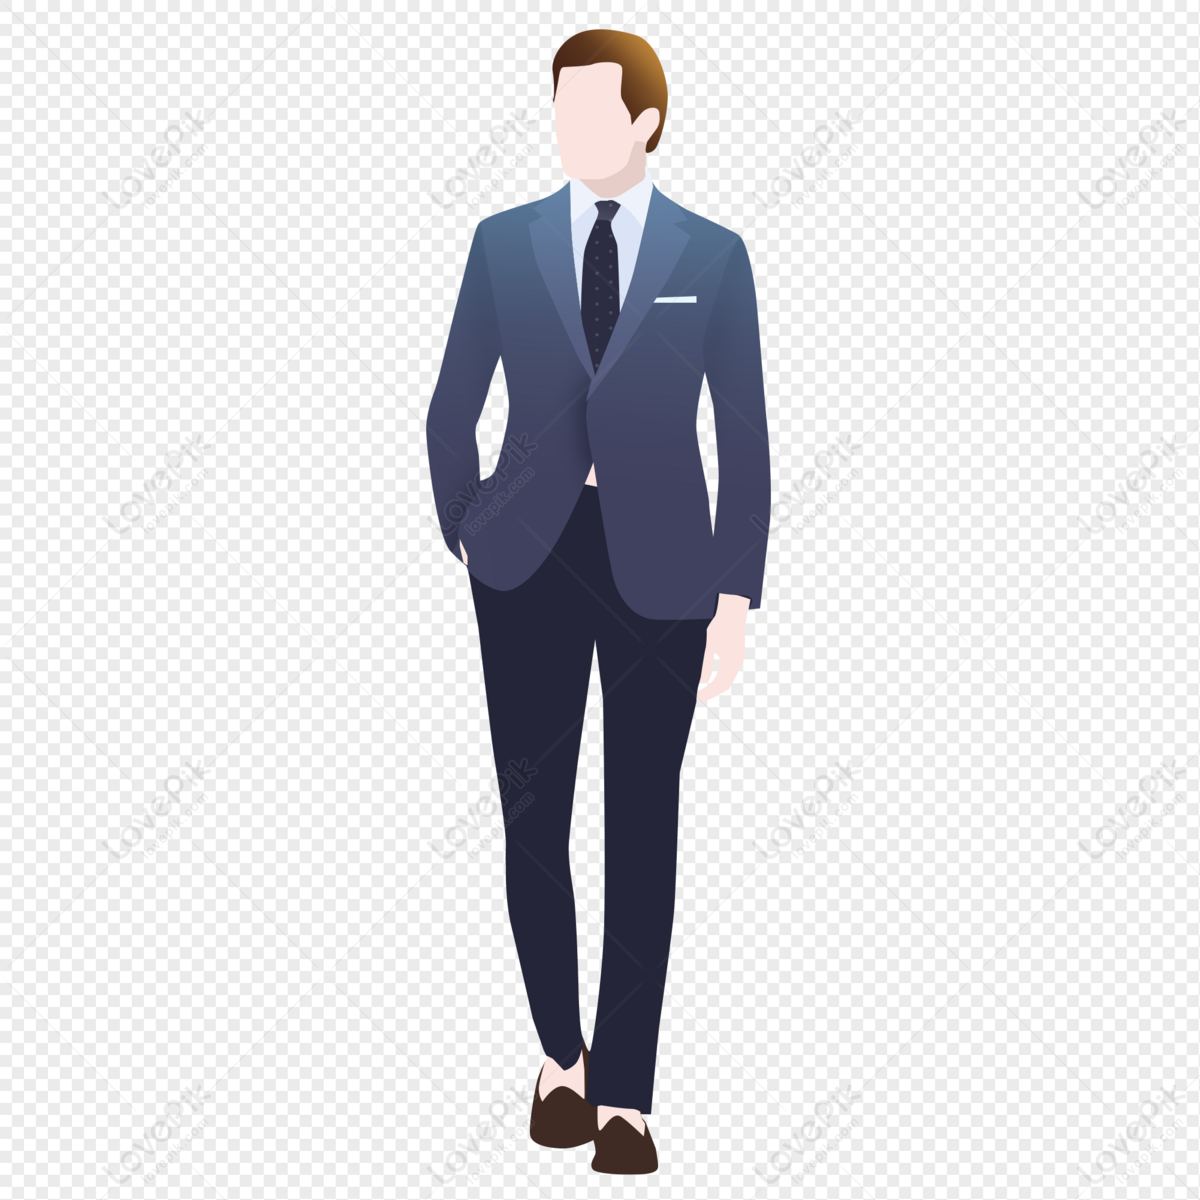 Flat Business Man PNG Picture And Clipart Image For Free Download ...